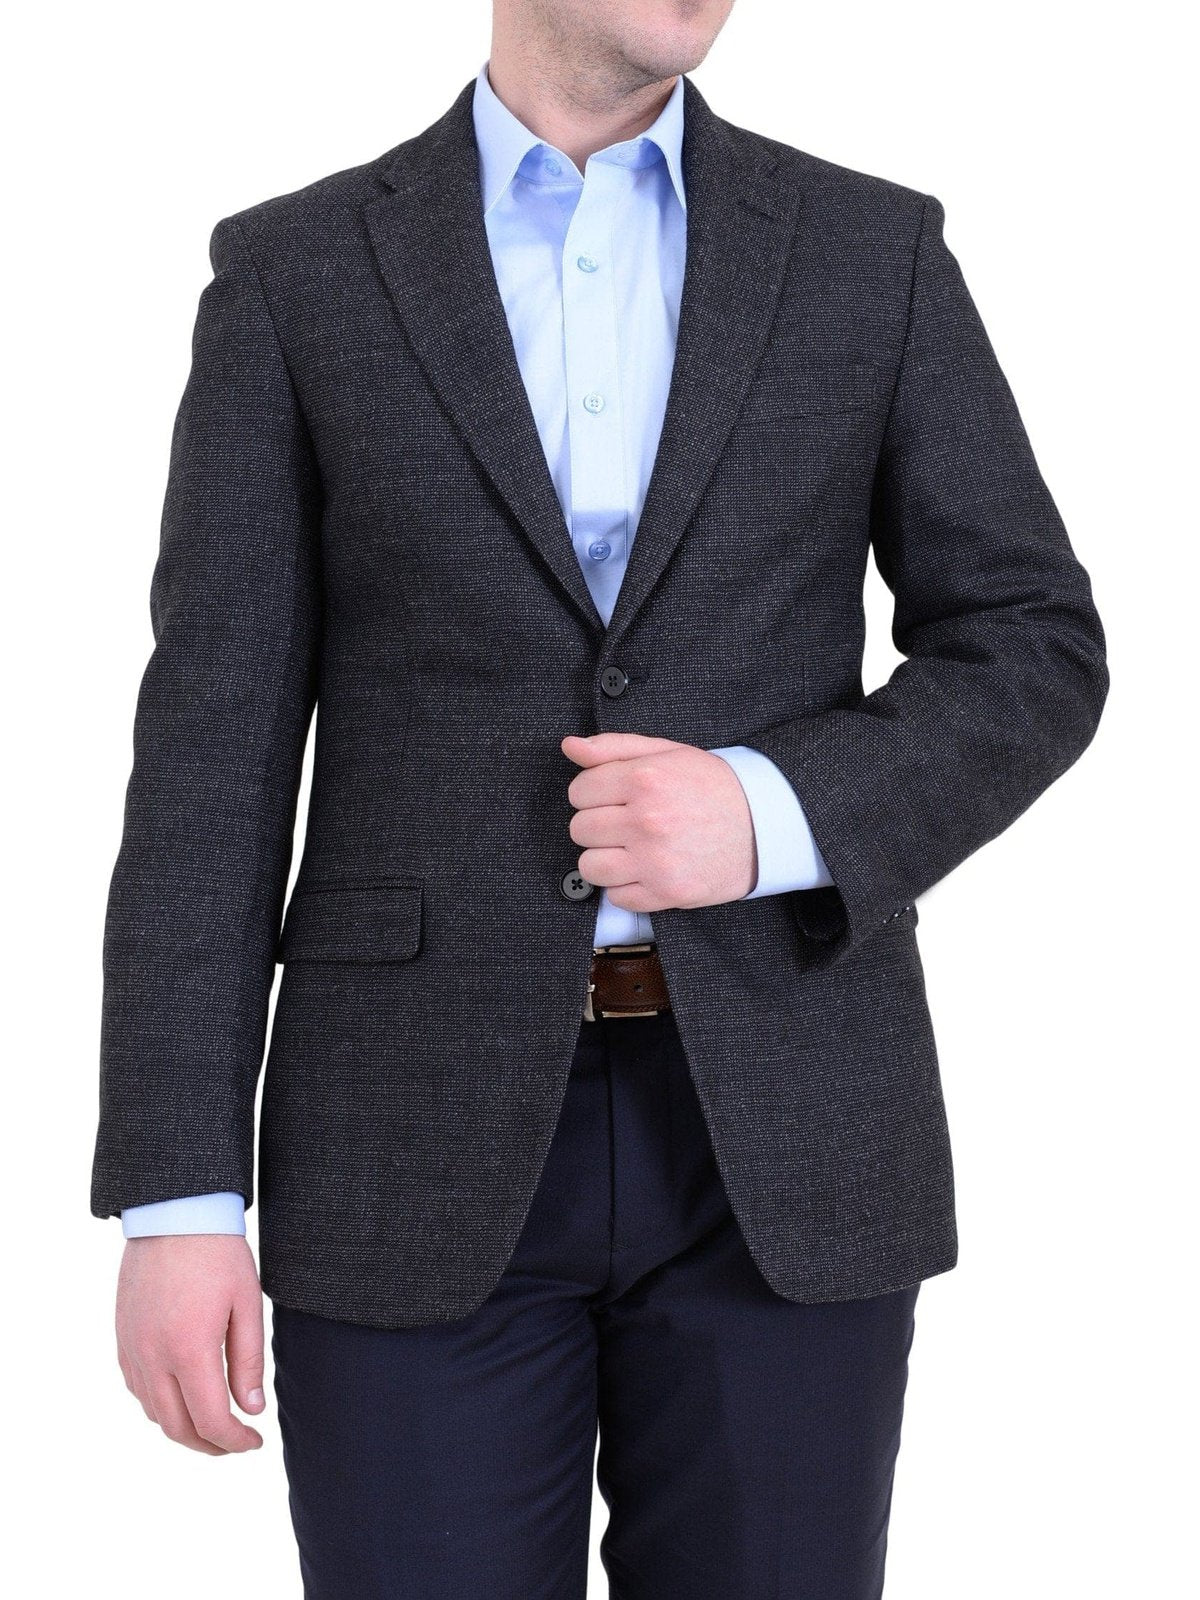 Tommy Hilfiger BLAZERS Tommy Hilfiger Trim Fit Charcoal Textured Soft Tailored Two Button Wool Blazer